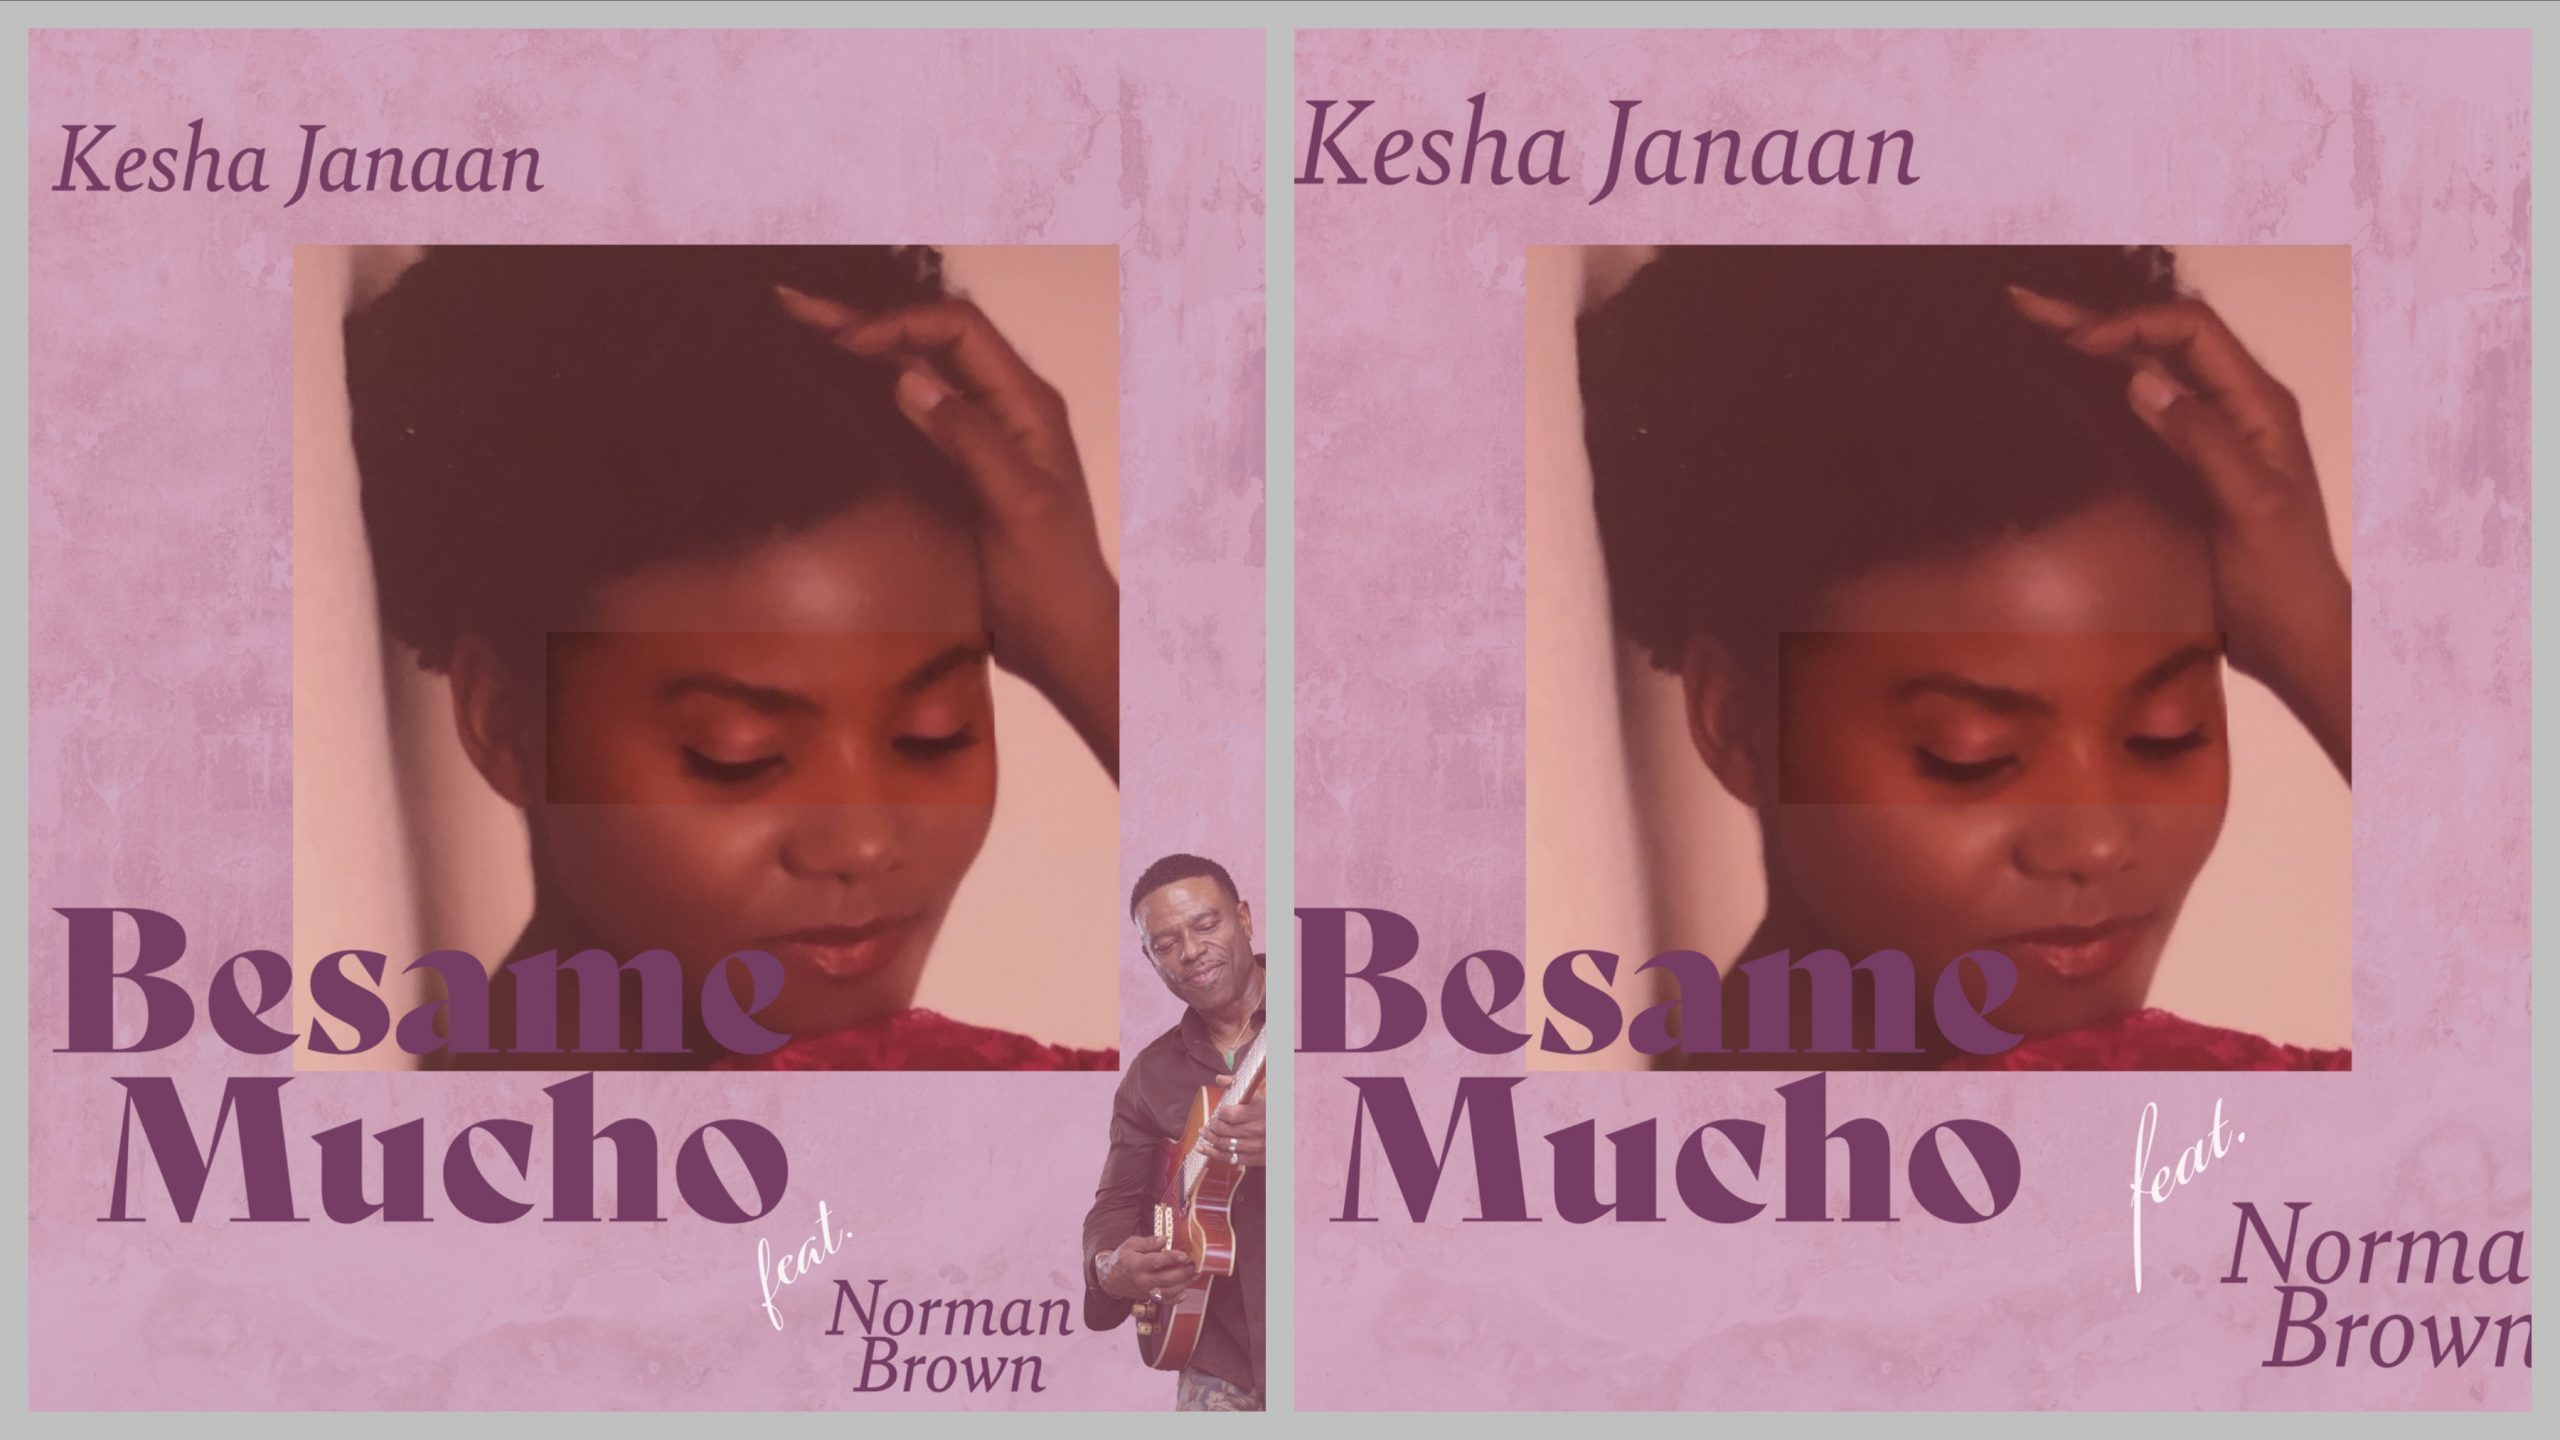 Kesha Janaan adds her own style and flavour to the latin, jazz classic ‘Besame Mucho’